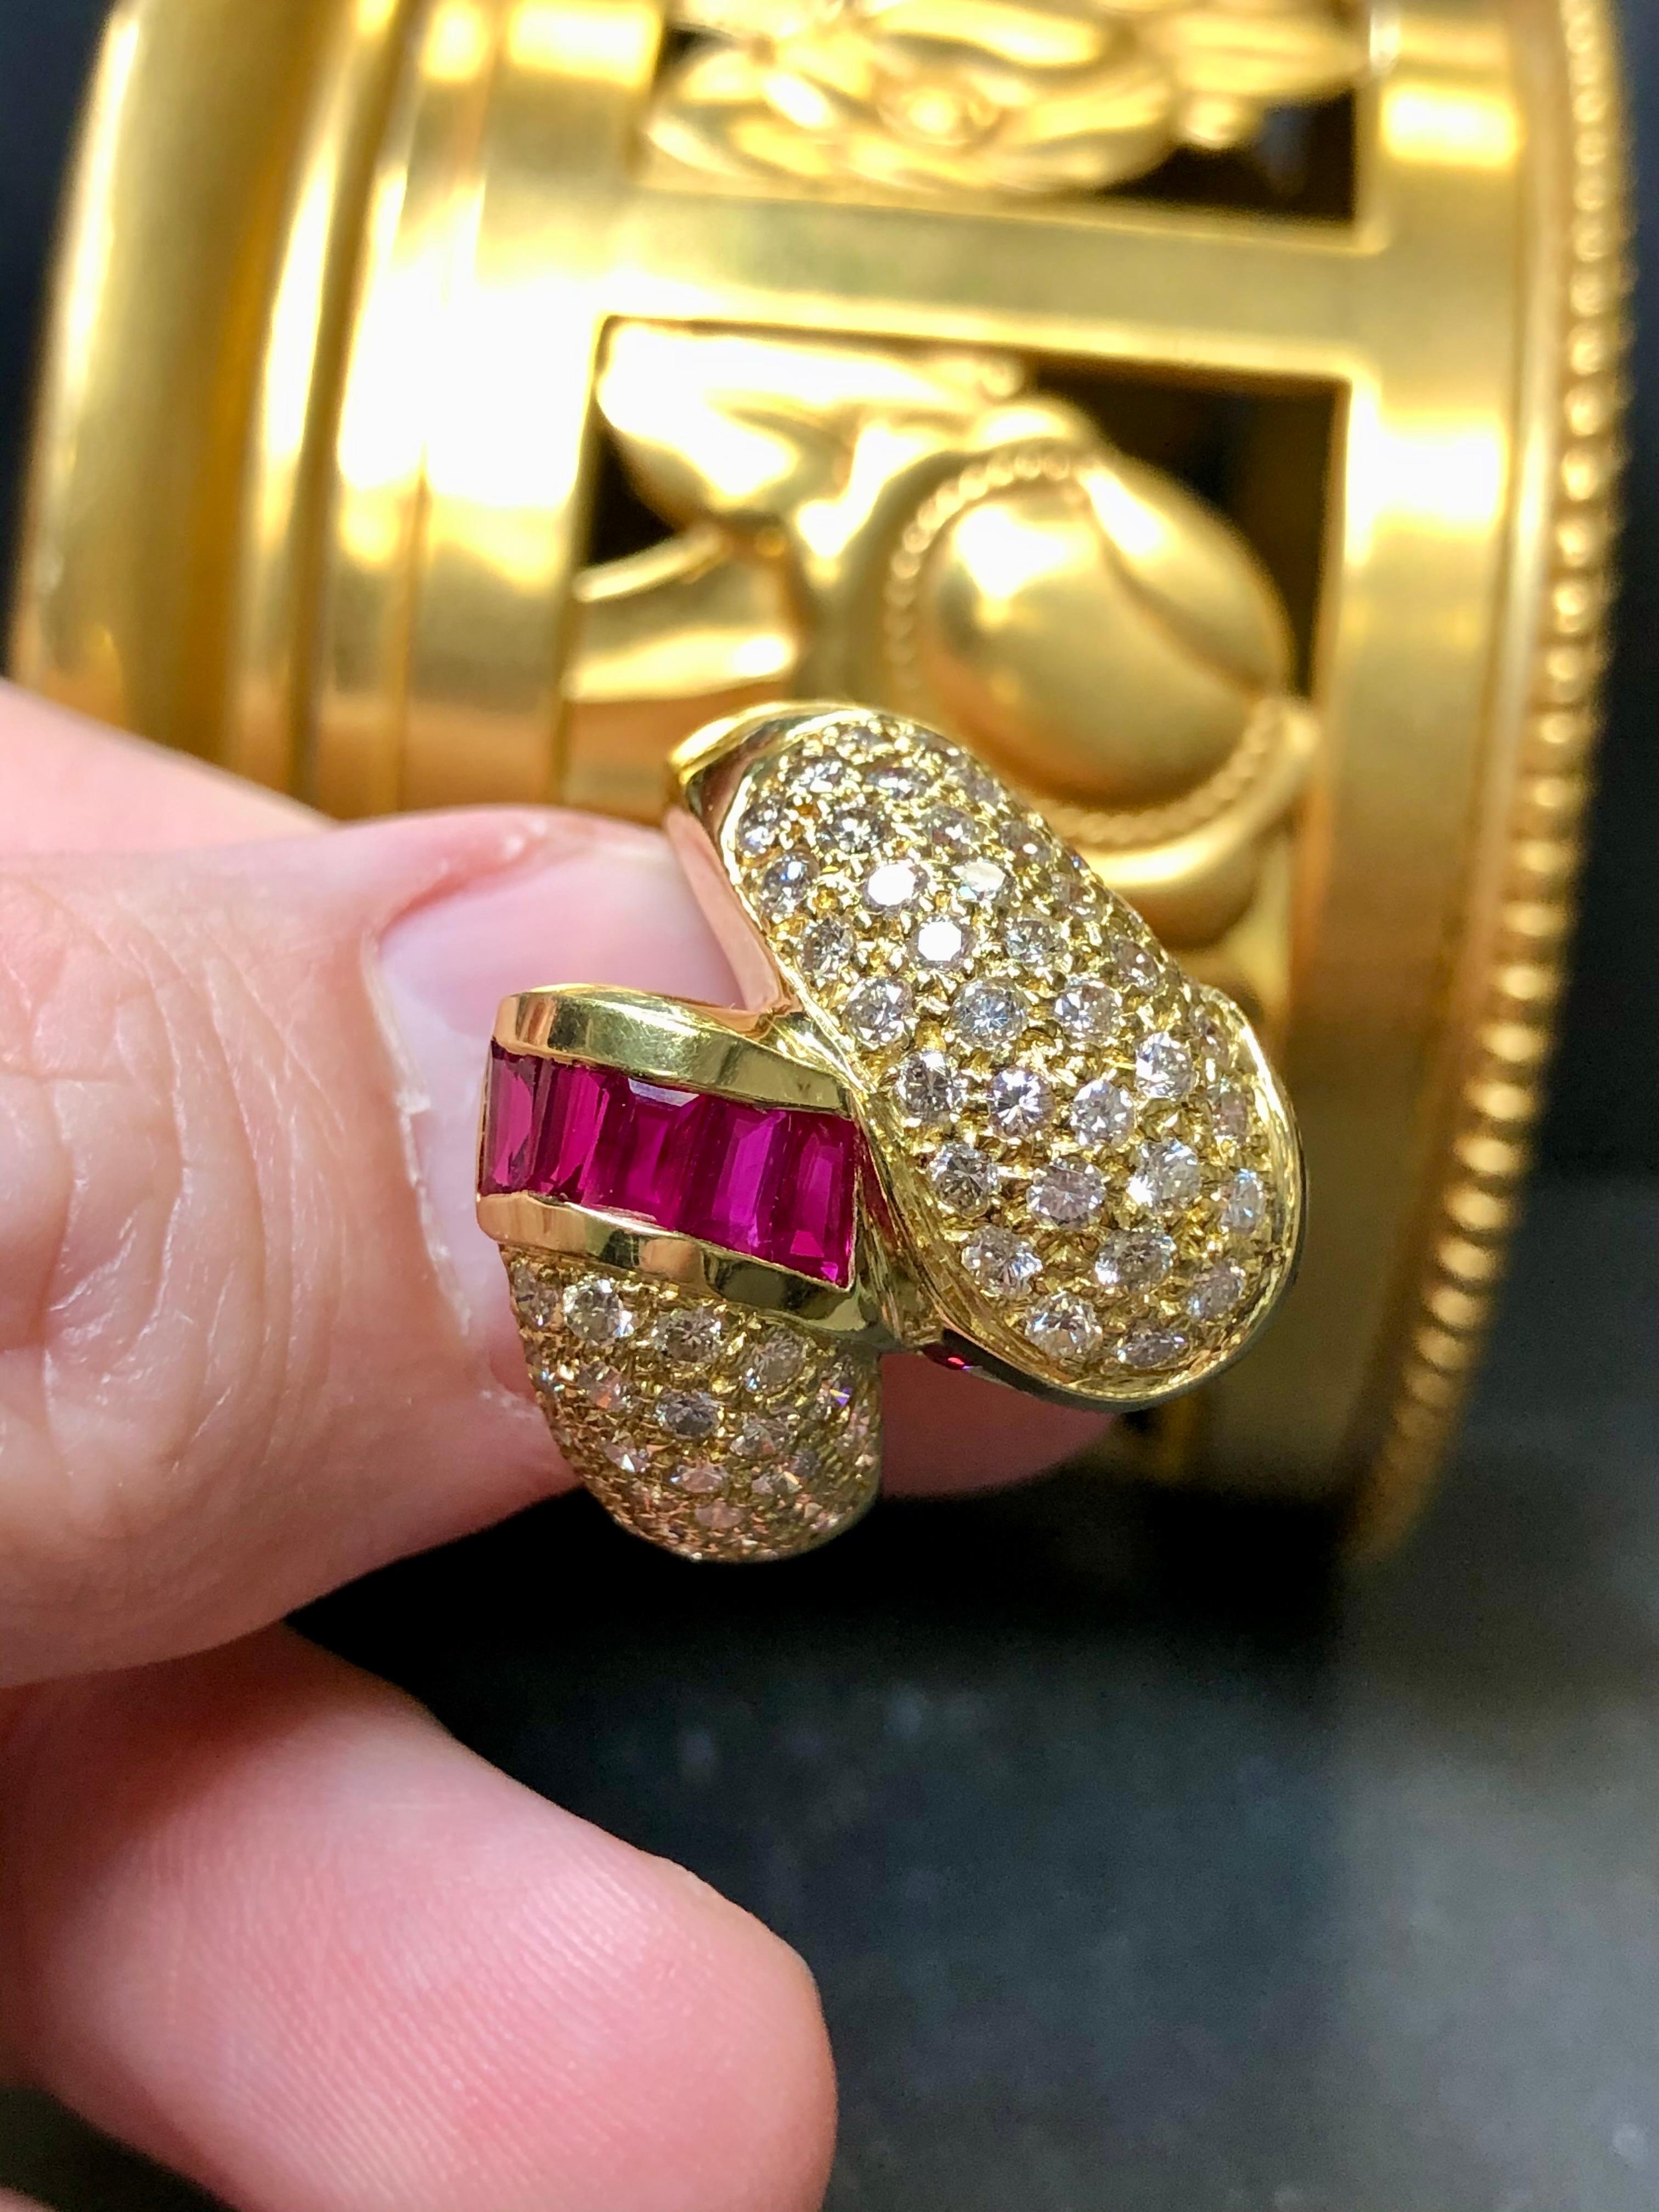 Vintage 18K Ruby Pave Diamond Bypass Large Cocktail Ring 4.53cttw Sz 7.75 In Good Condition For Sale In Winter Springs, FL